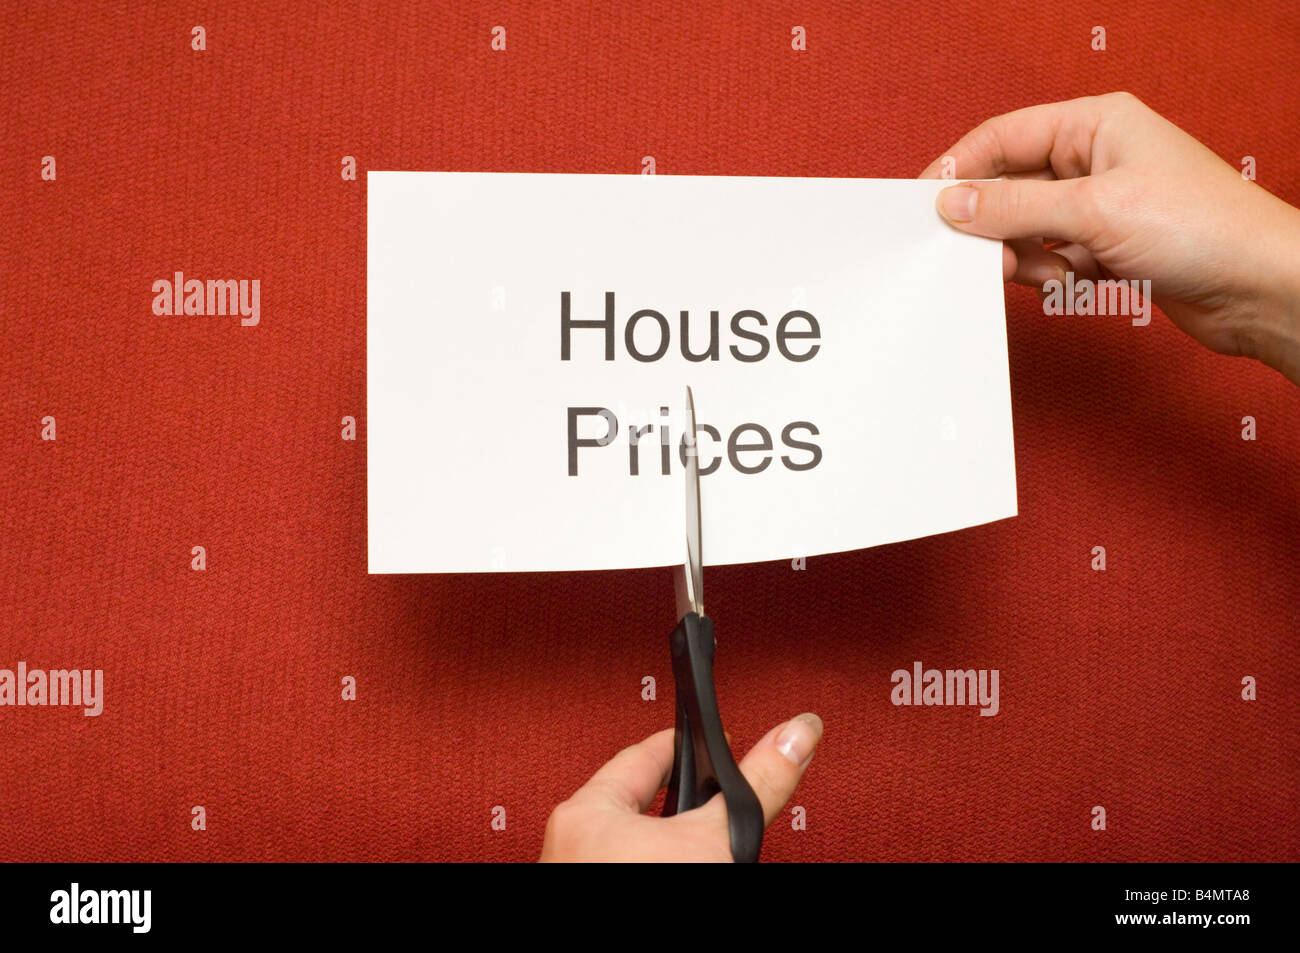 Picture of person cutting a piece of paper with 'House prices' written on it using a pair of scissors Stock Photo